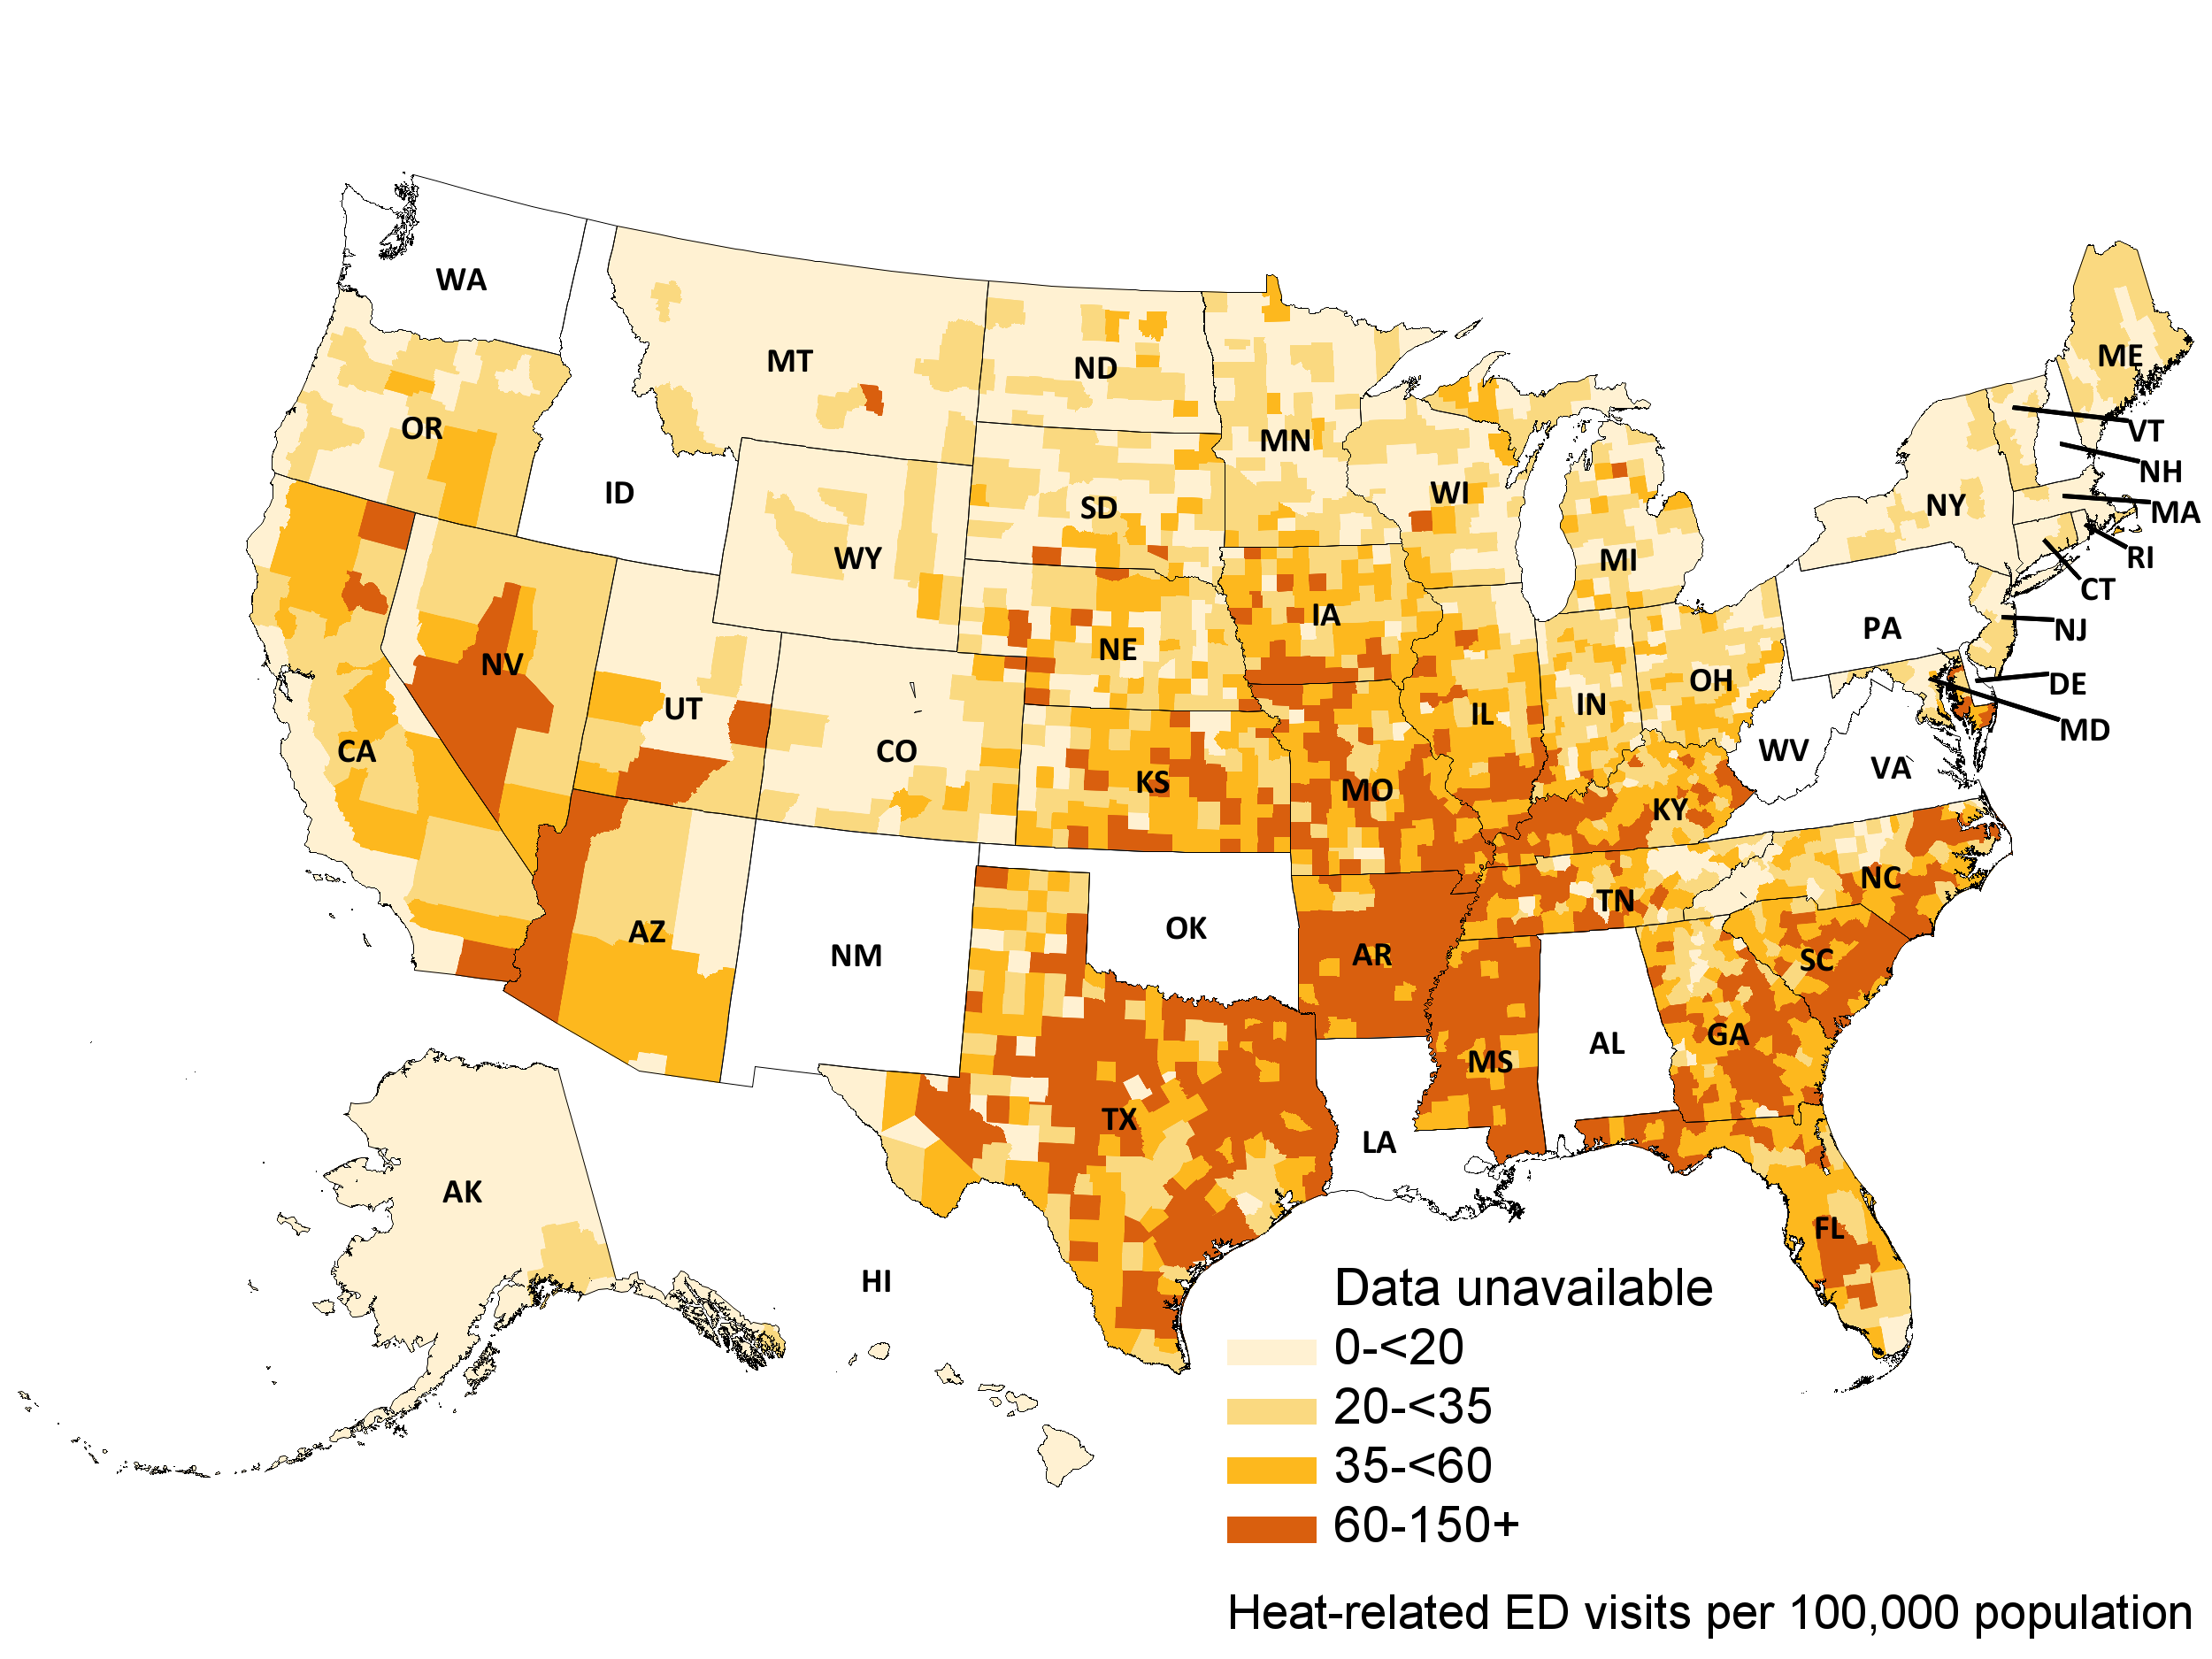 Emergency Department Visits with a Diagnosis Directly Indicating Heat Exposure per 100,000 Population, 2016-2019. Source: Agency for Healthcare Research and Quality (AHRQ), Healthcare Cost and Utilization Project (HCUP), State Emergency Department Databases (SEDD) and State Inpatient Databases (SID), 2016-2019.] 